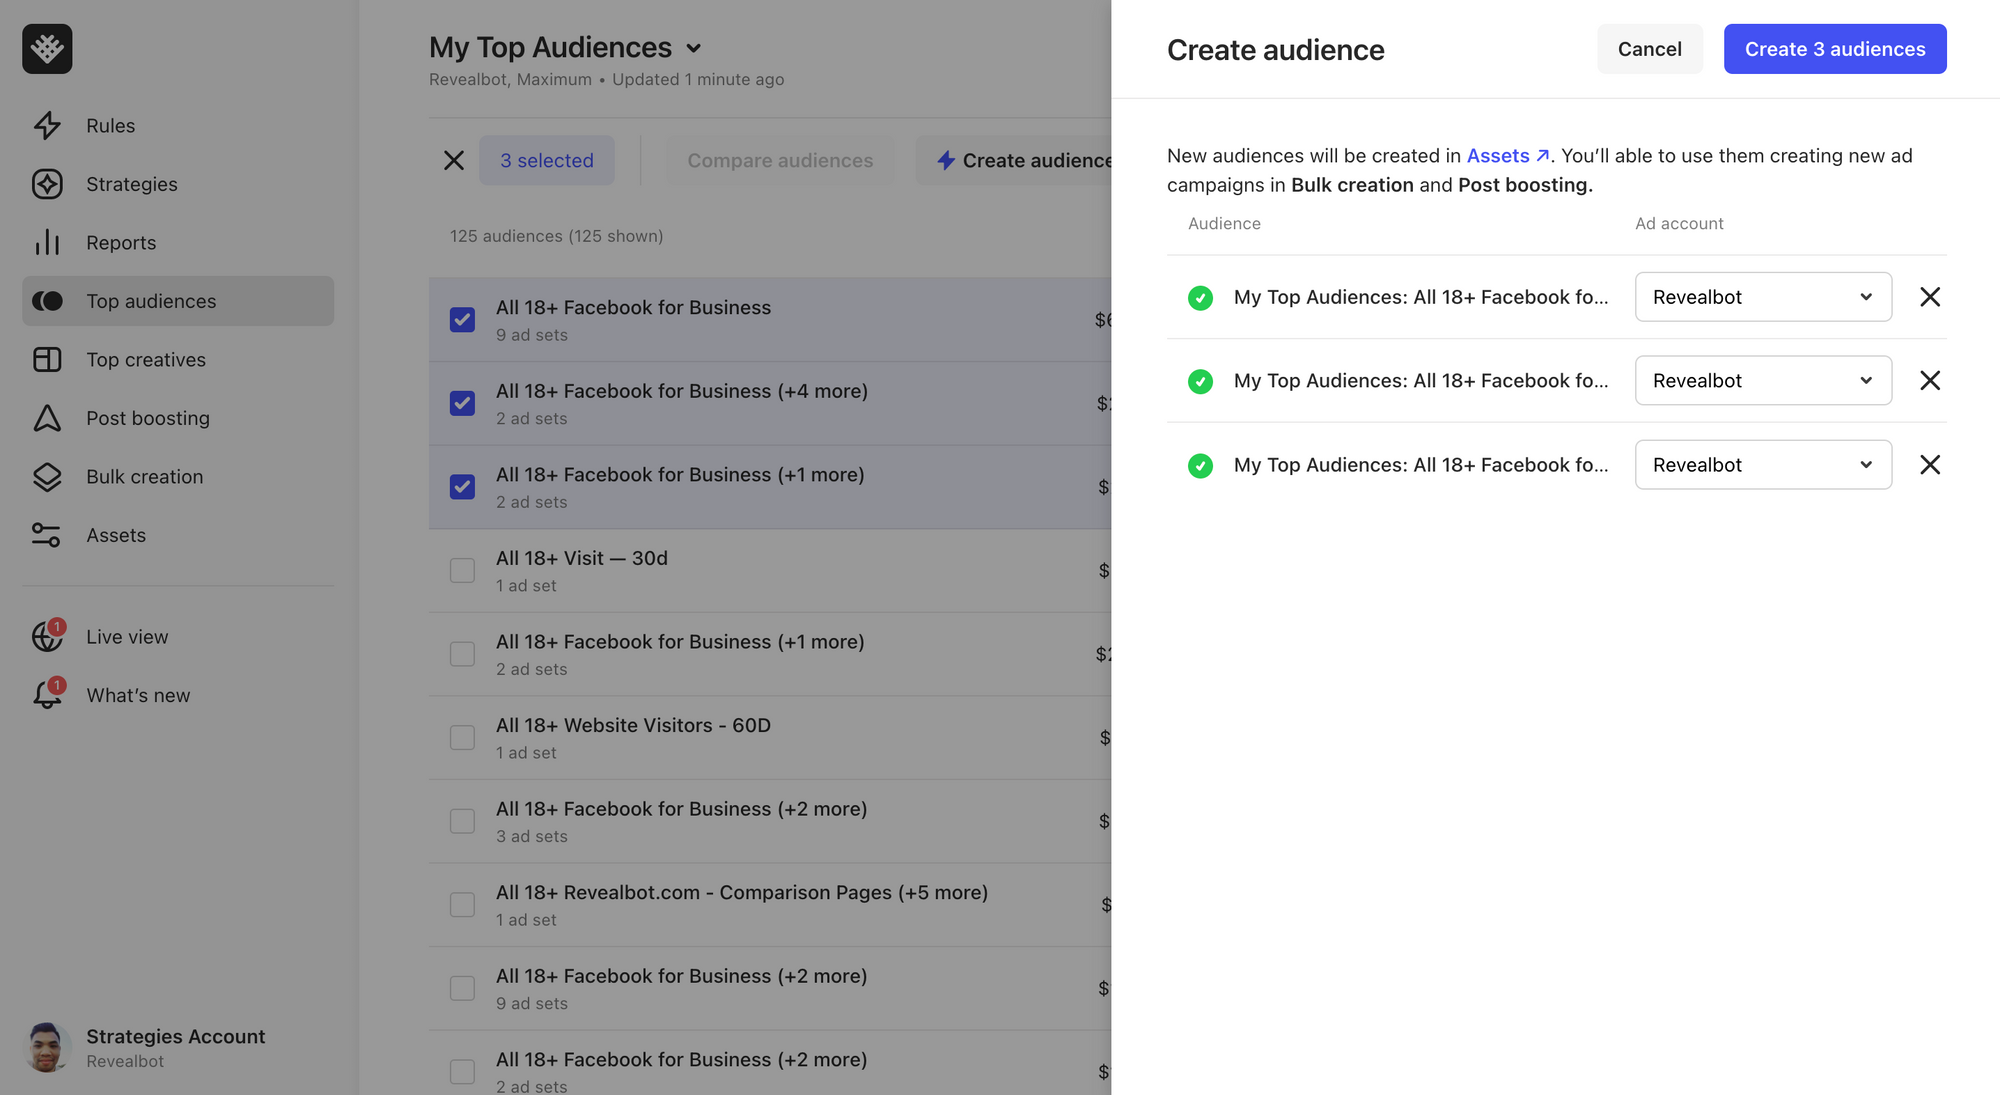 The custom audience creation feature interface